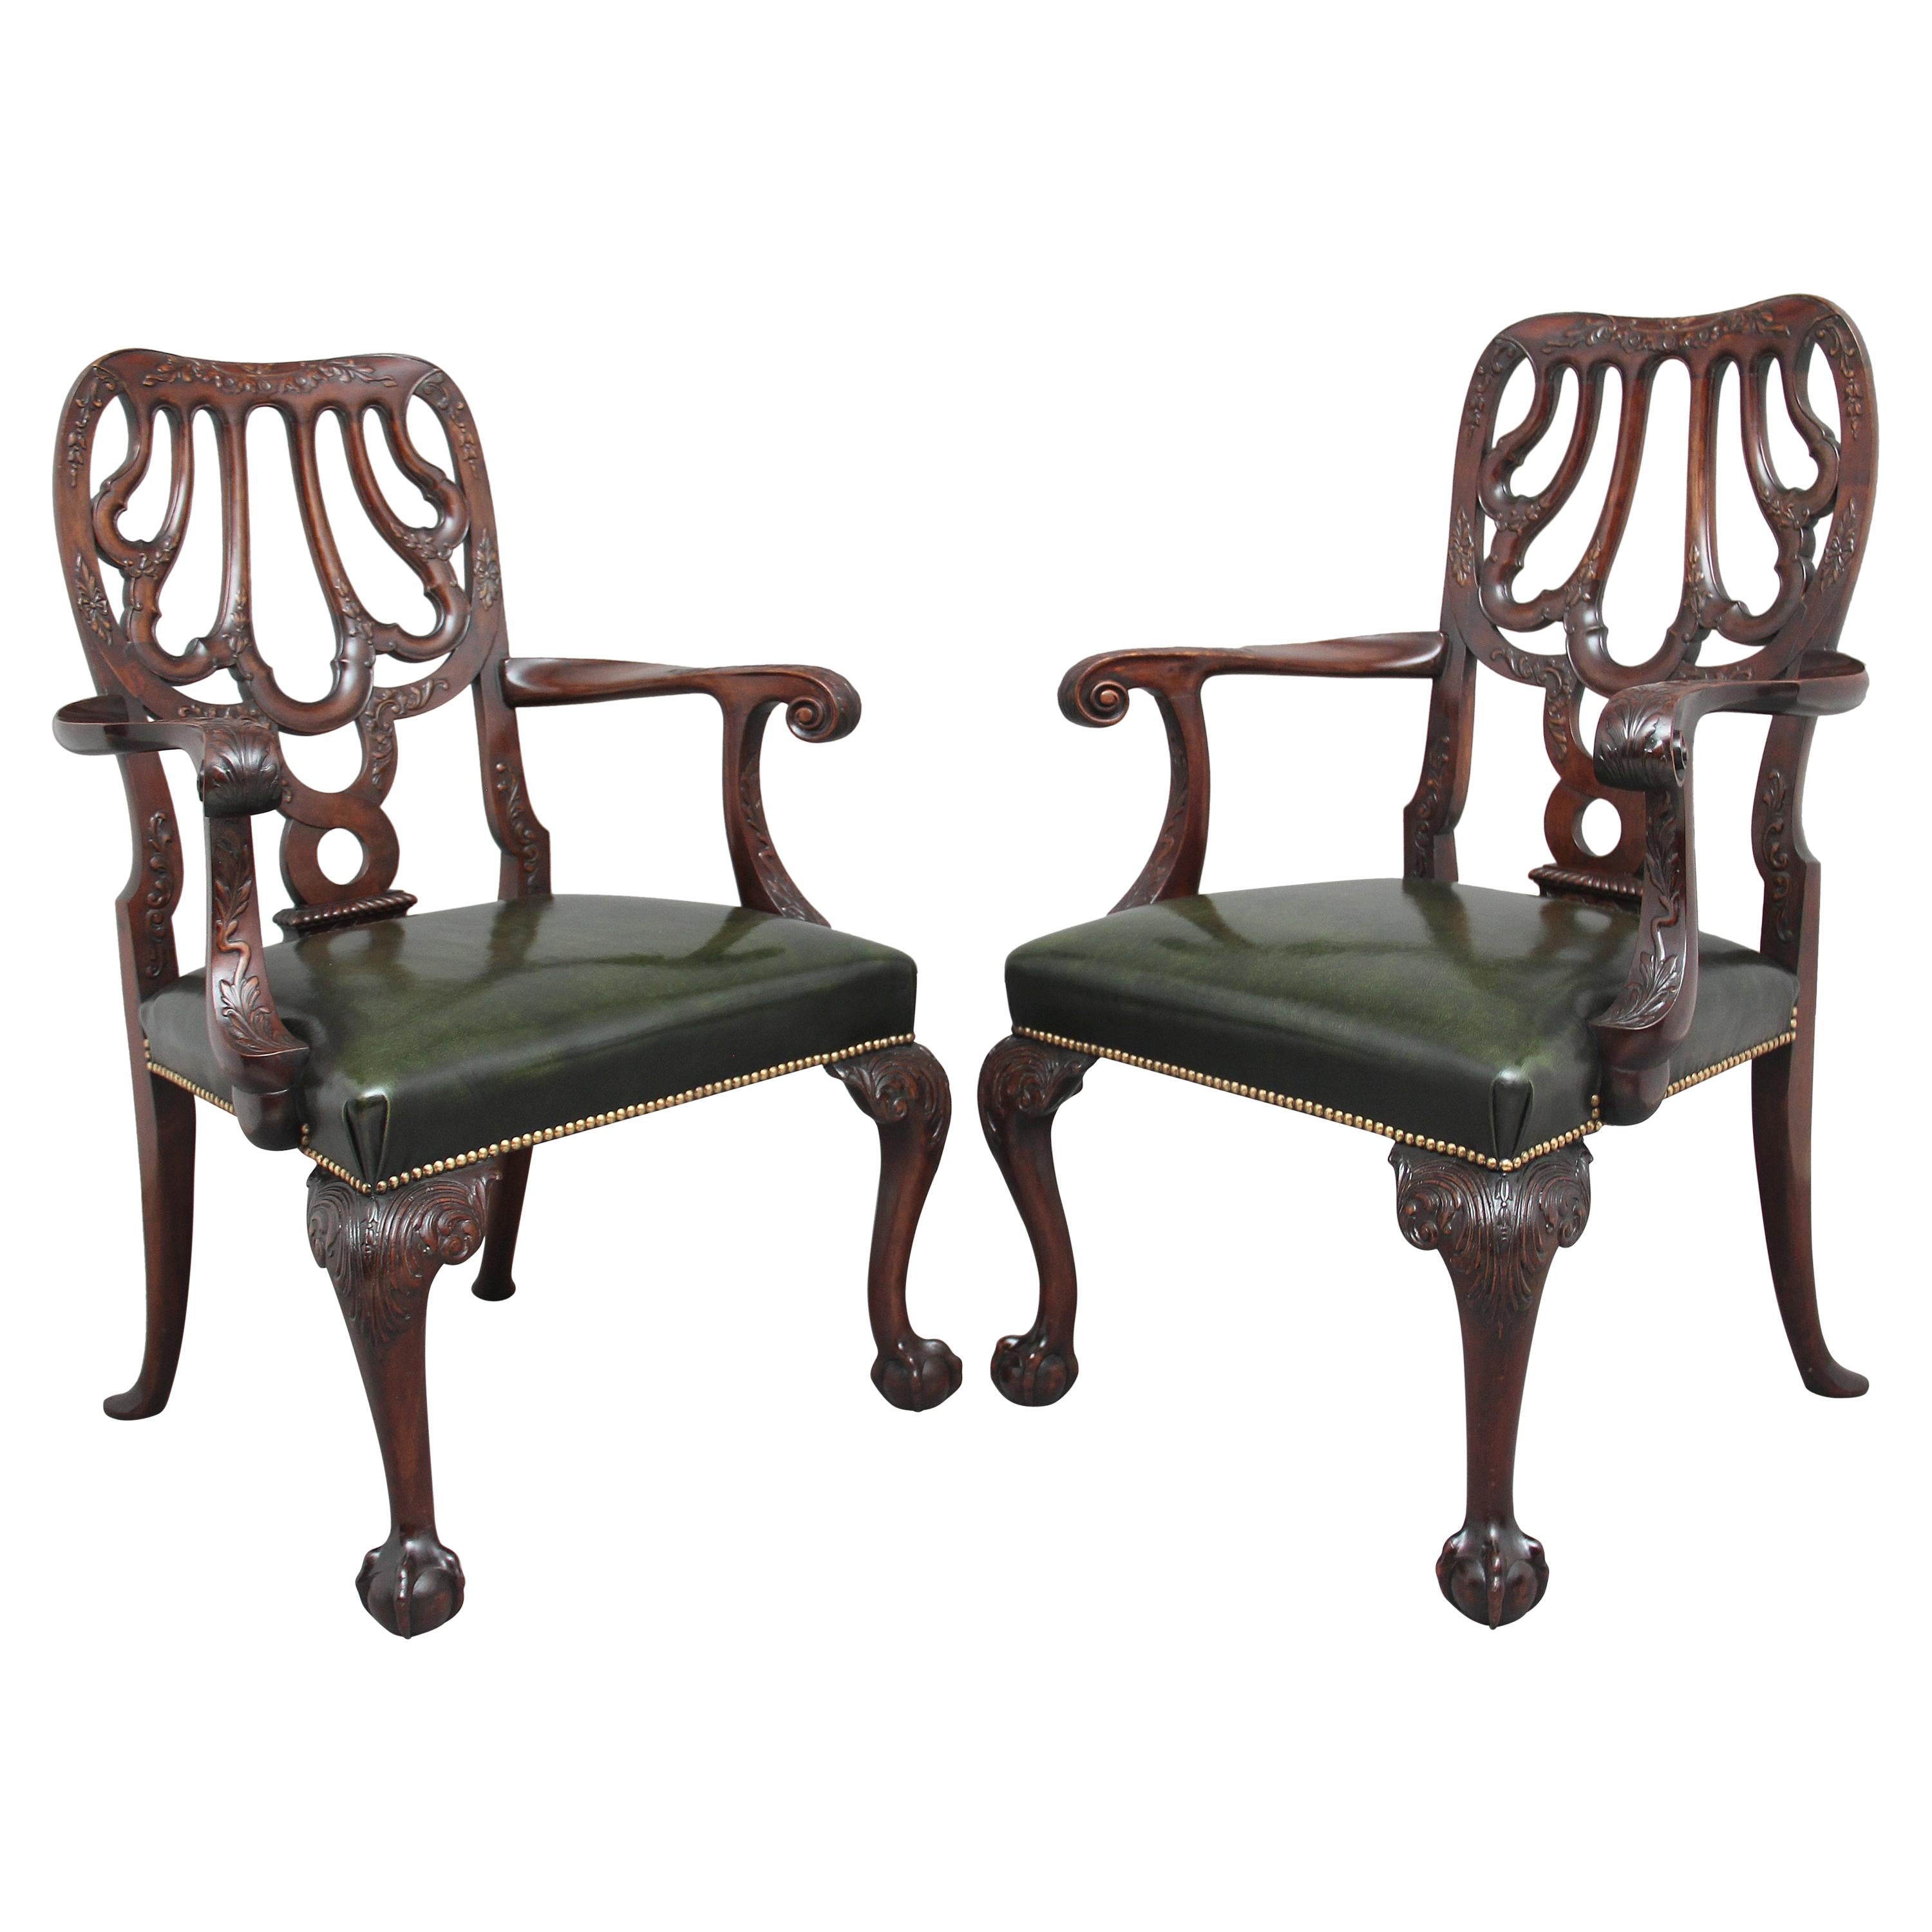 Pair of 19th Century carved mahogany armchairs in the Chippendale style